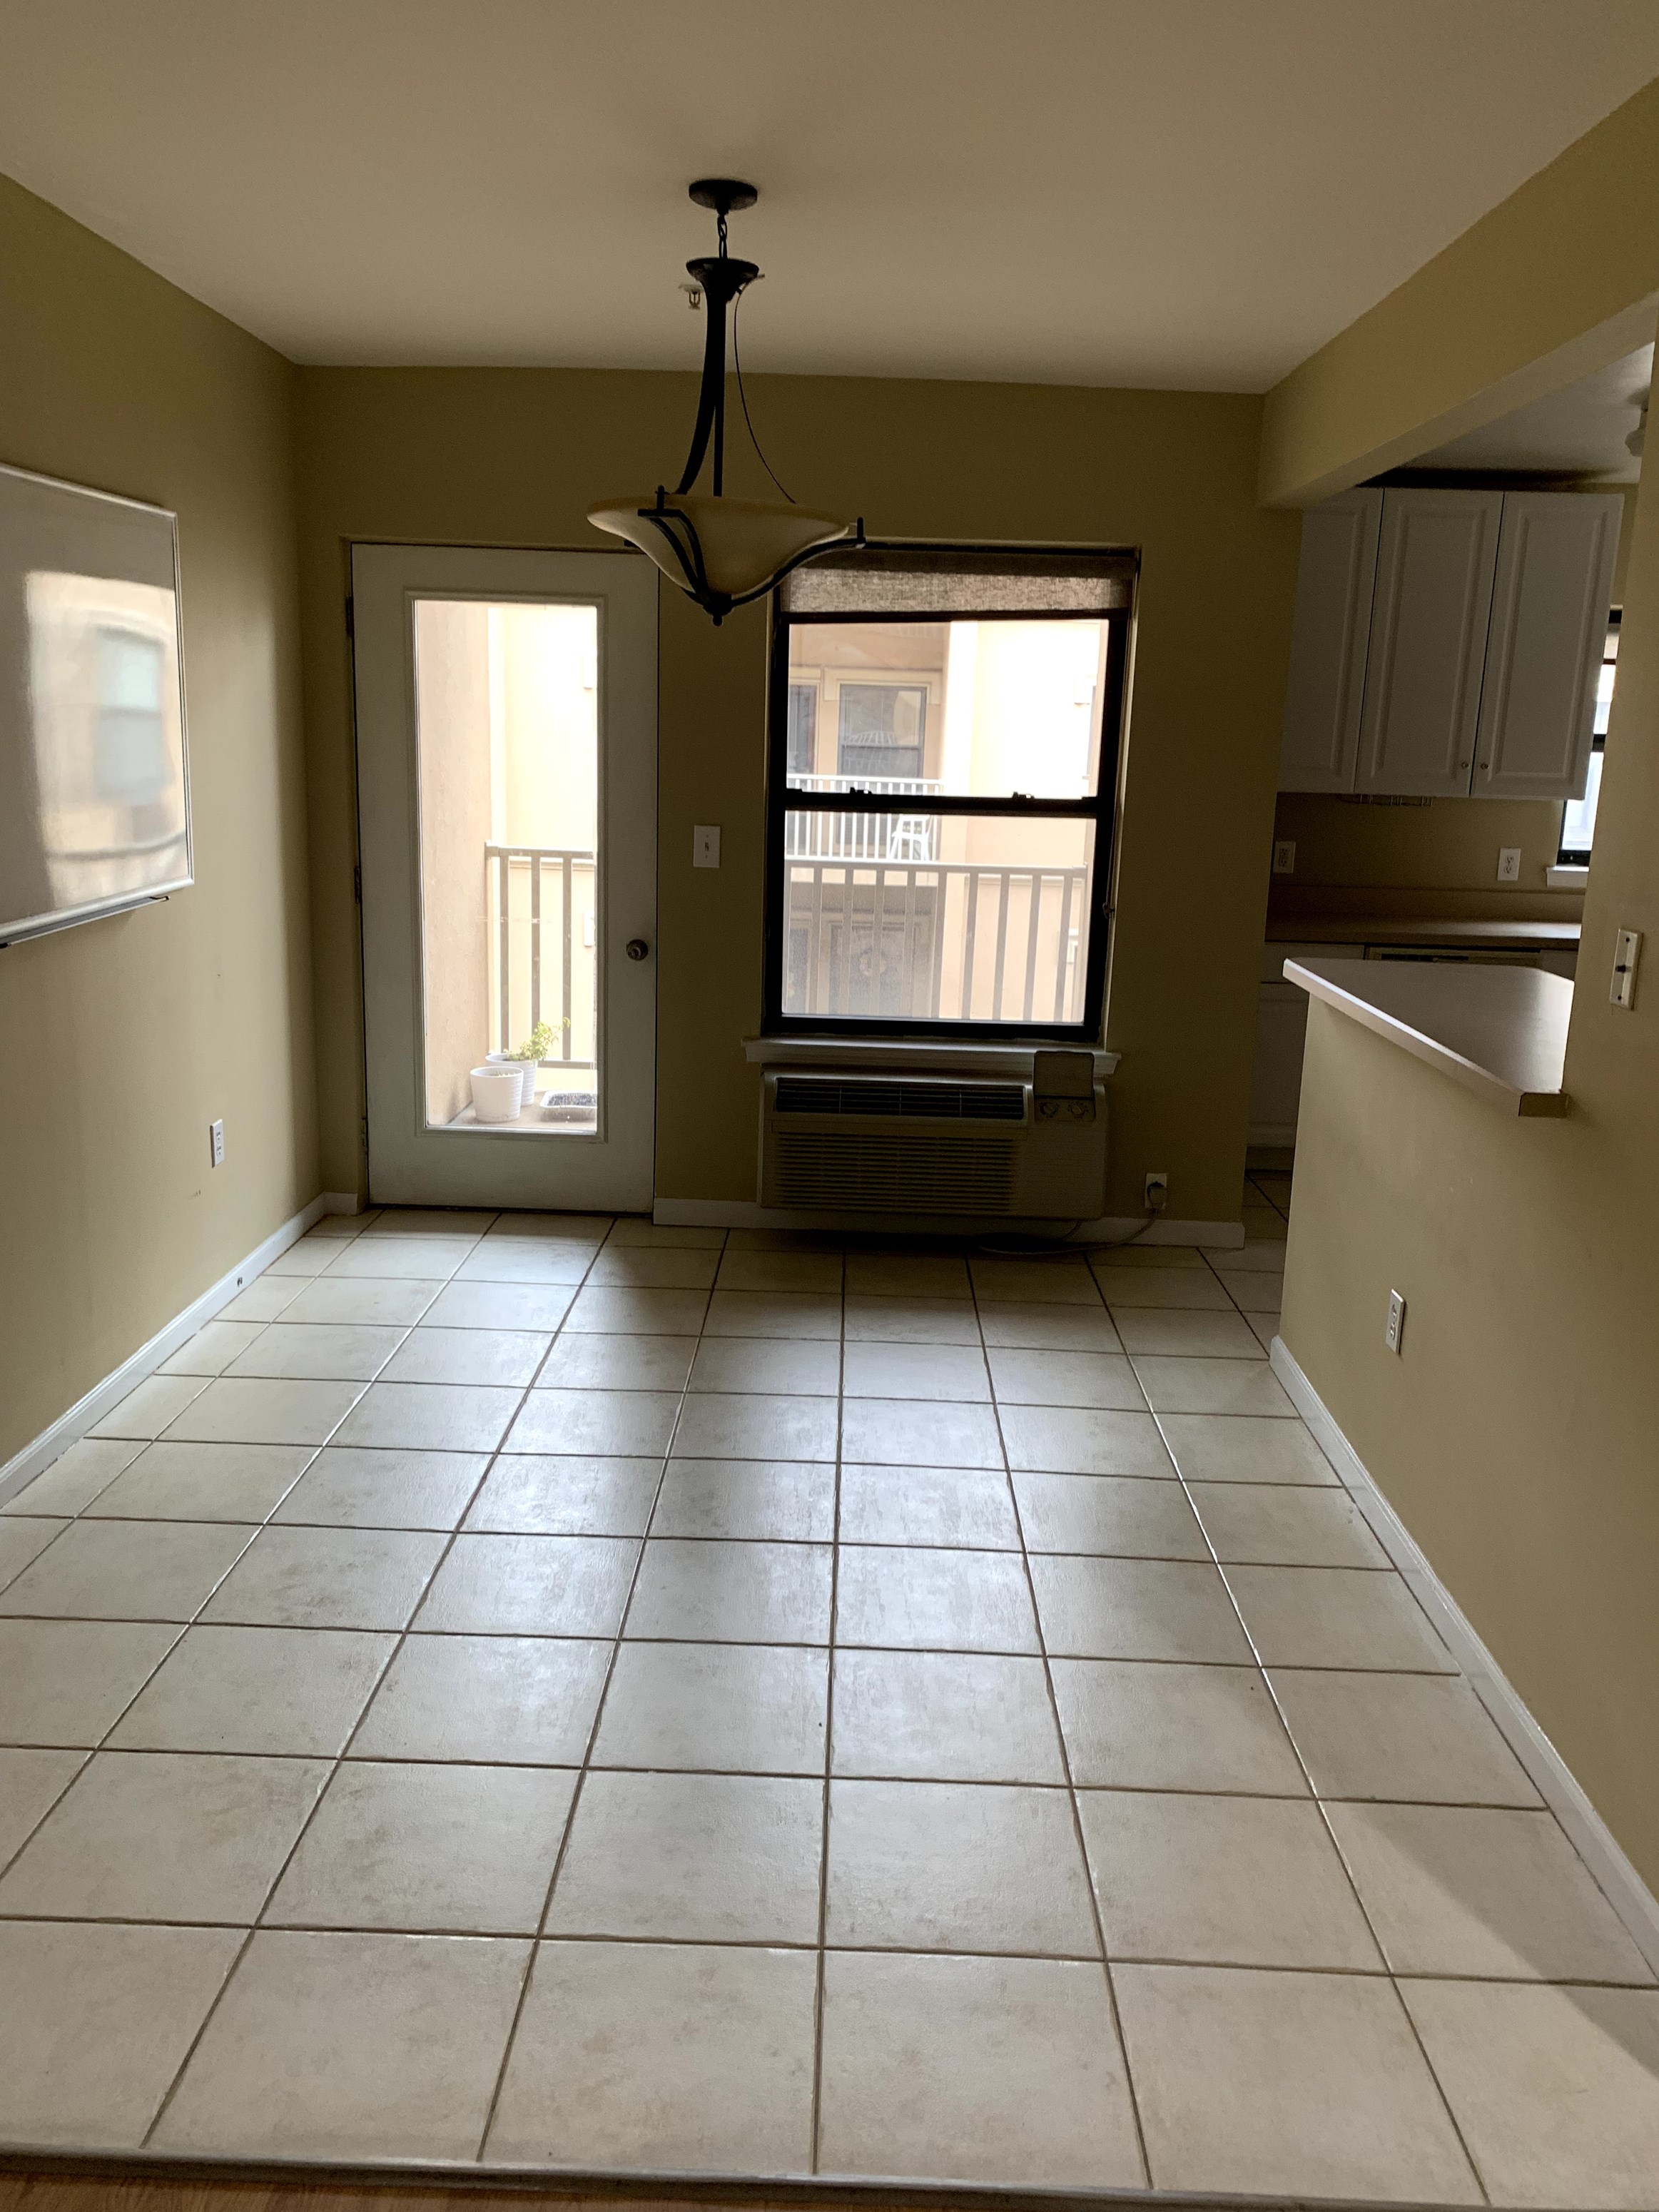 45min 1hour From 42ndst Port Authority Nyc 1bed Room Apartment For Rent In North Bergen Nj 1 Bhk Condo In Jersey City Nj 1235685 Sulekha